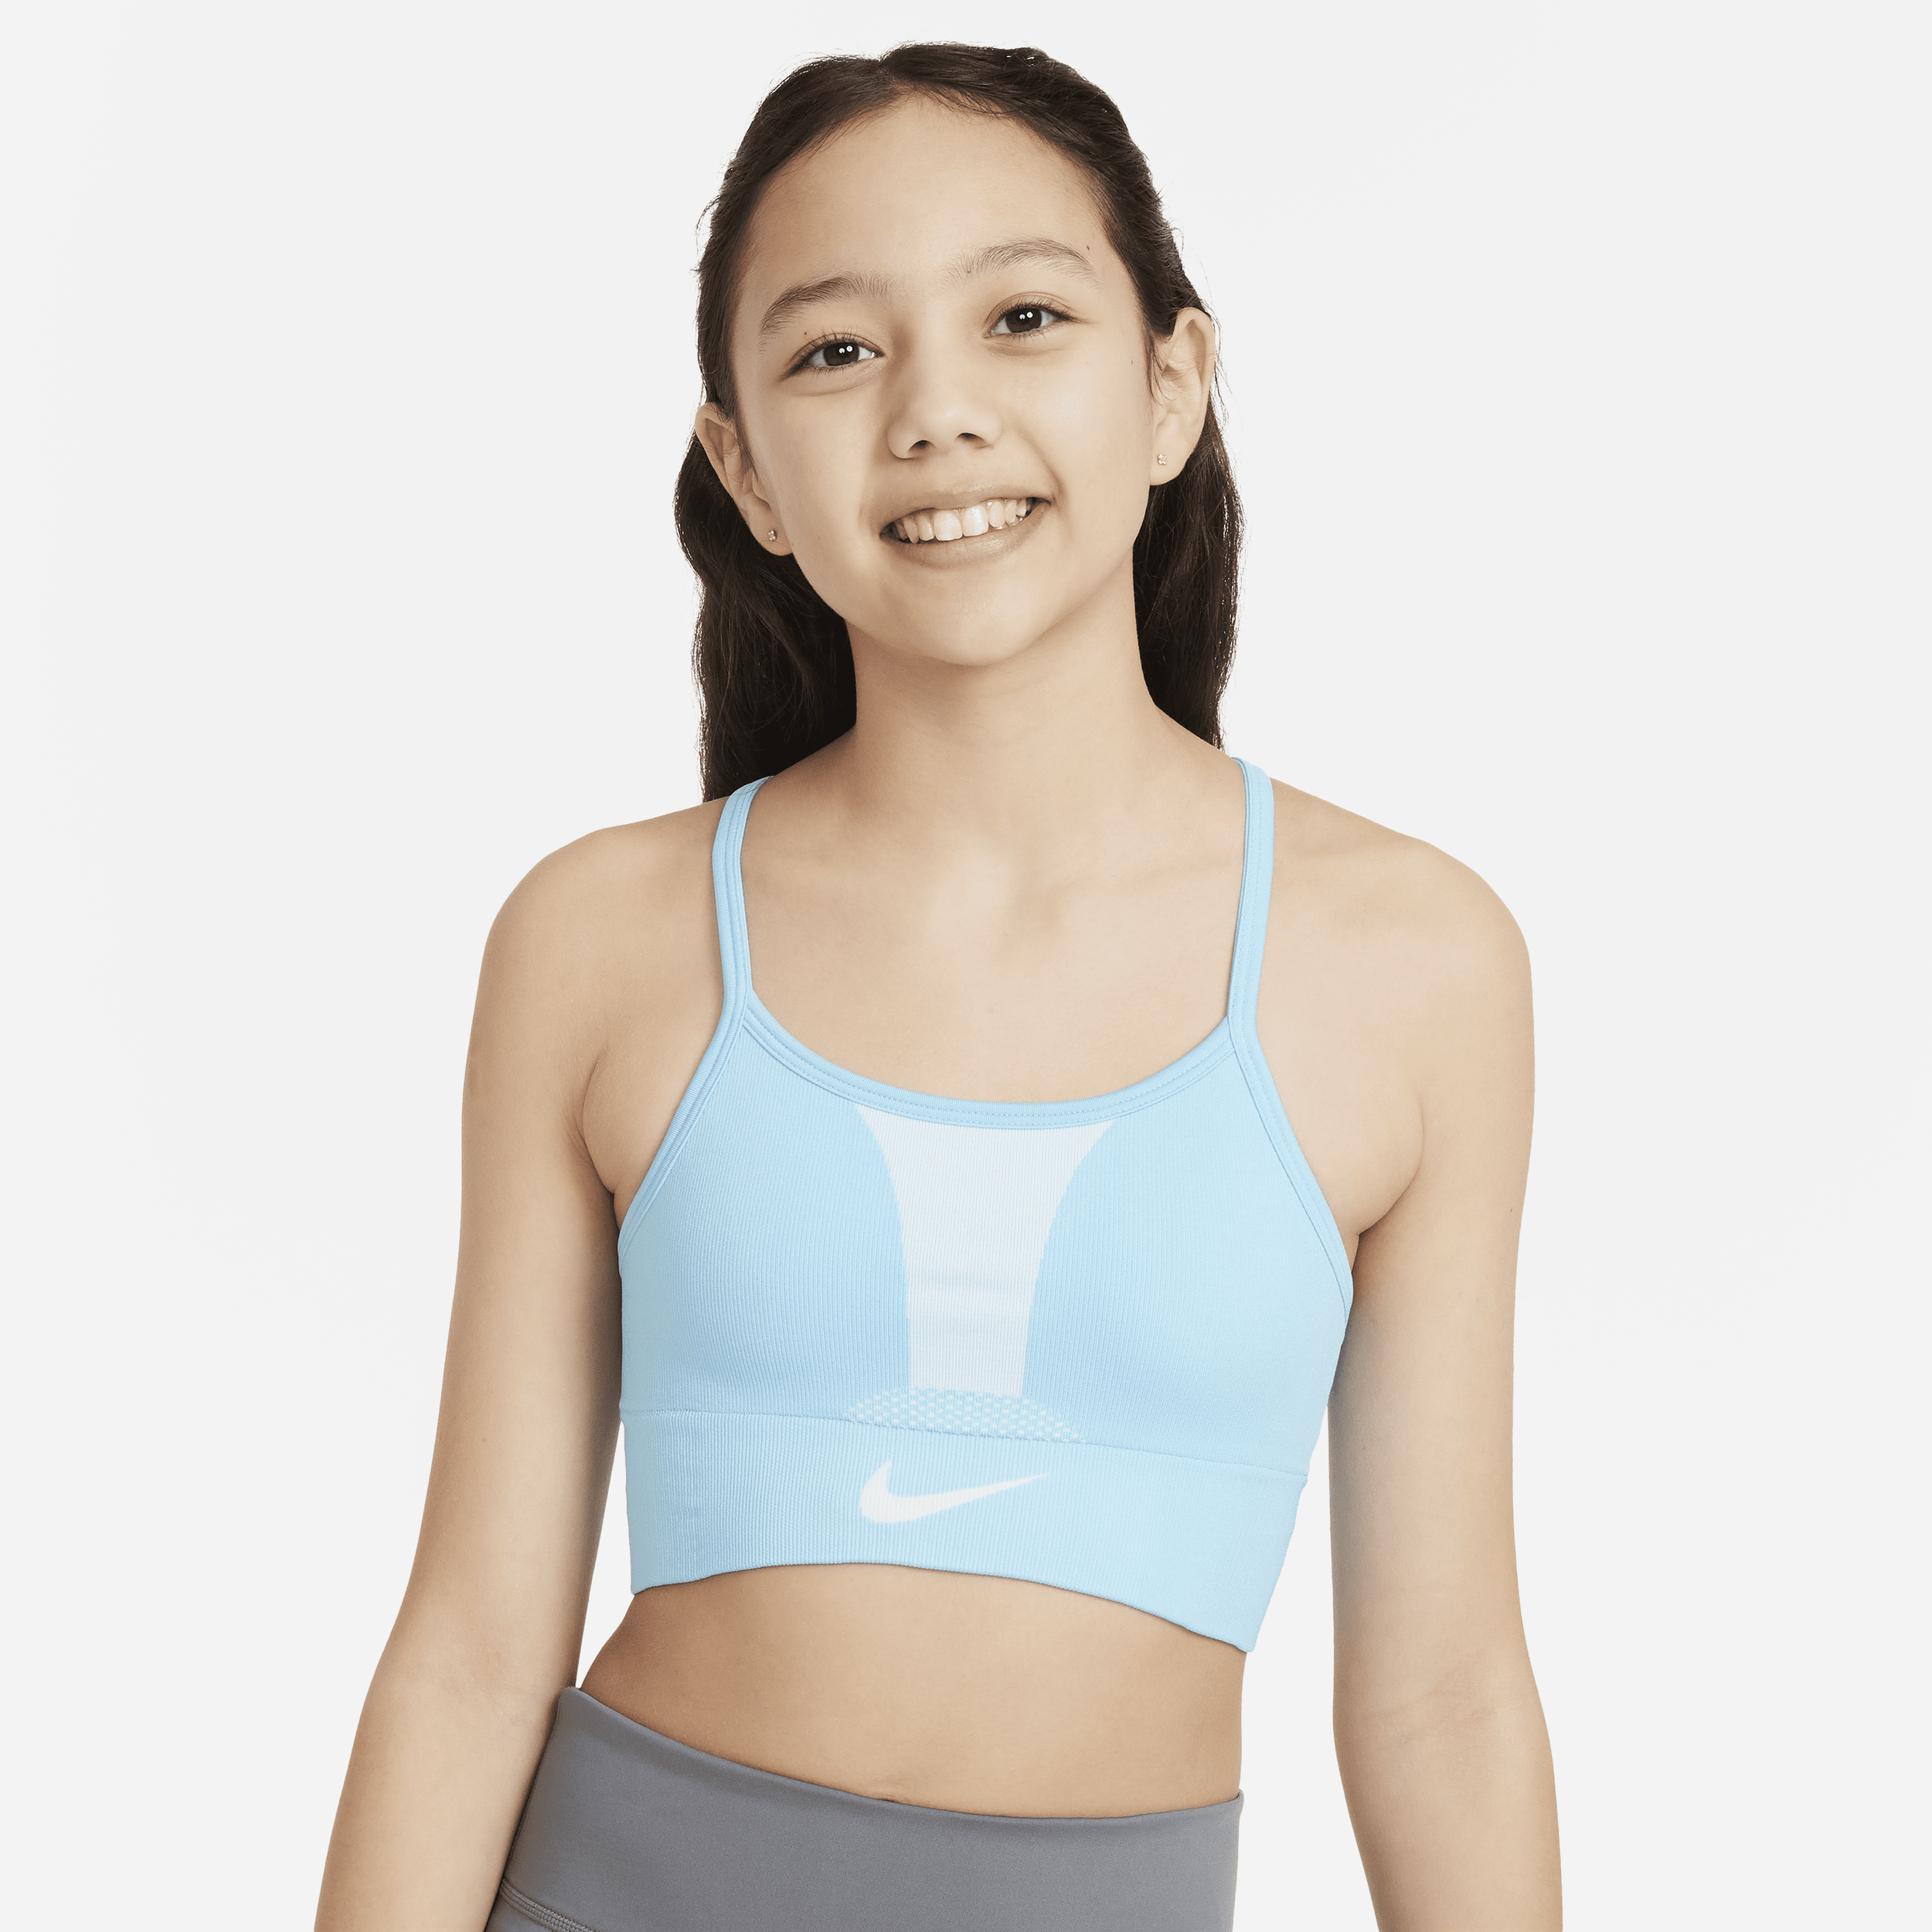 See Price in Bag Nike Indy Dance Sports Bras.